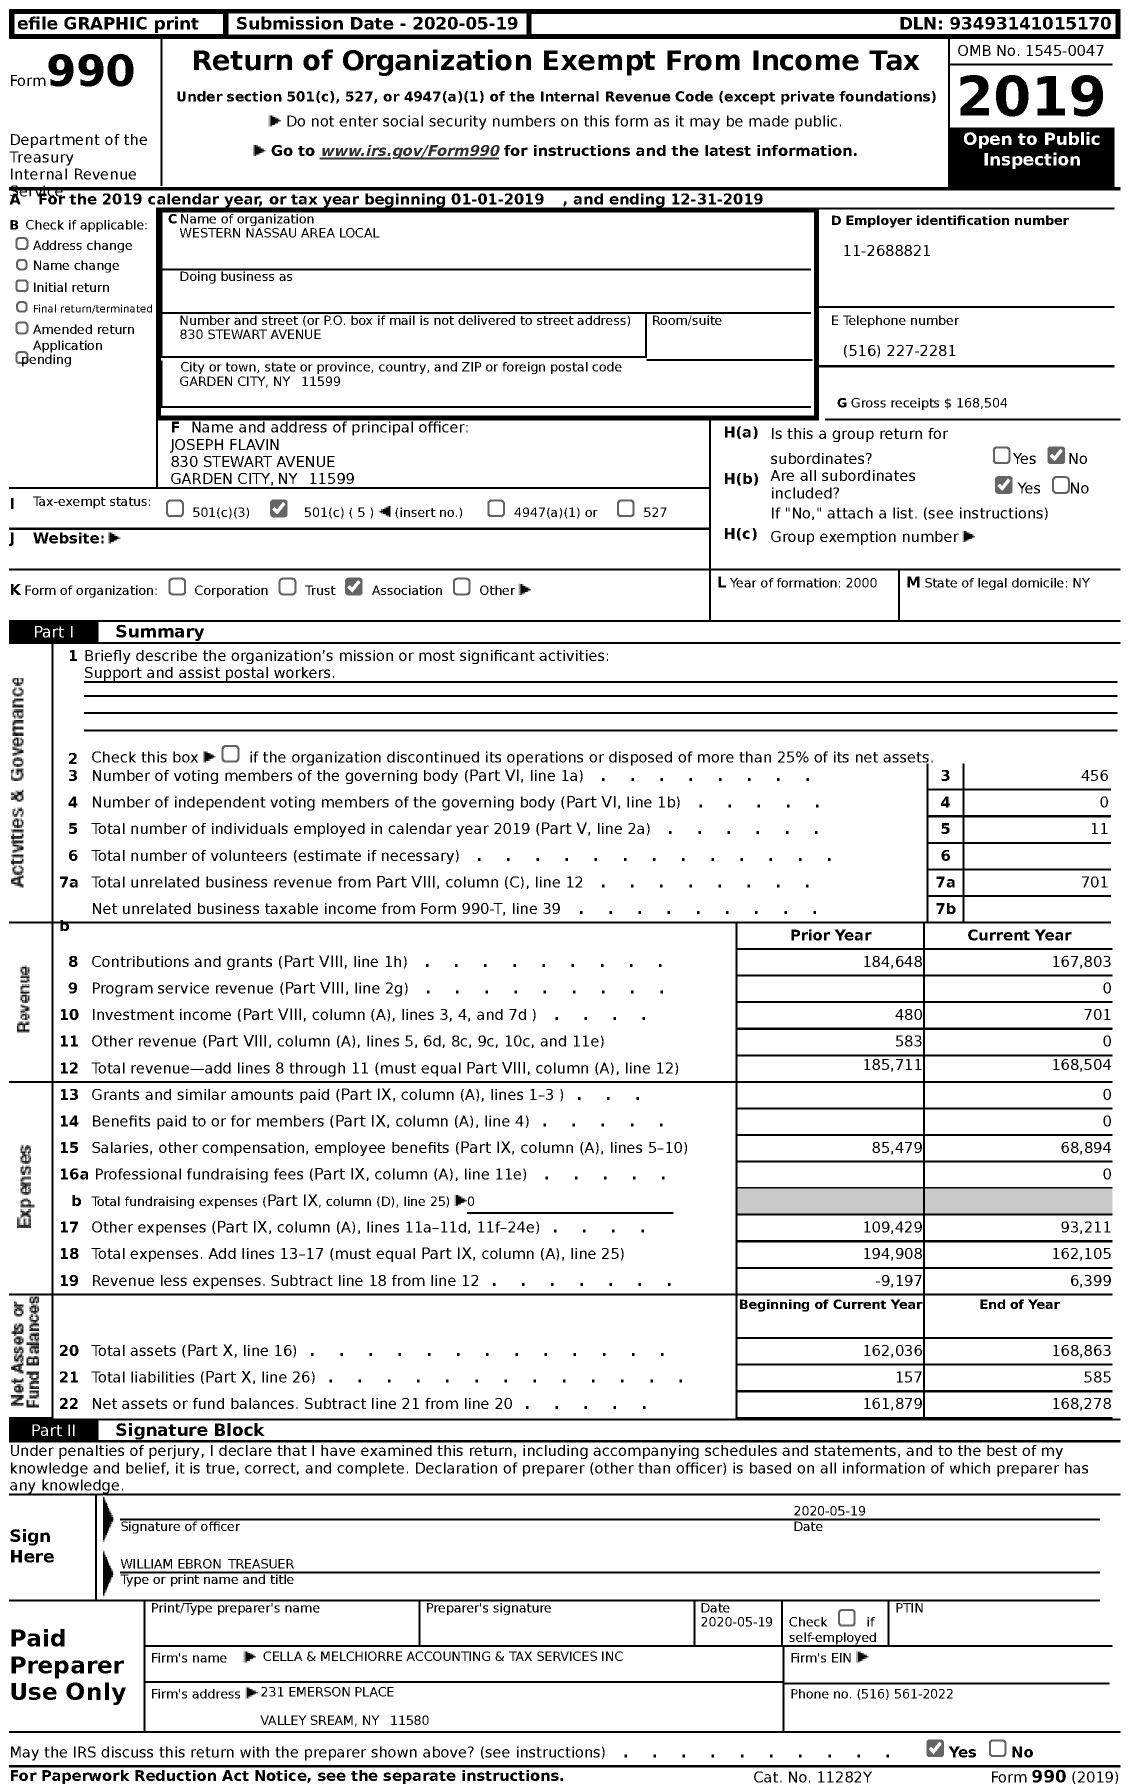 Image of first page of 2019 Form 990 for American Postal Workers Union - 7115 Western Nassau New York Area L